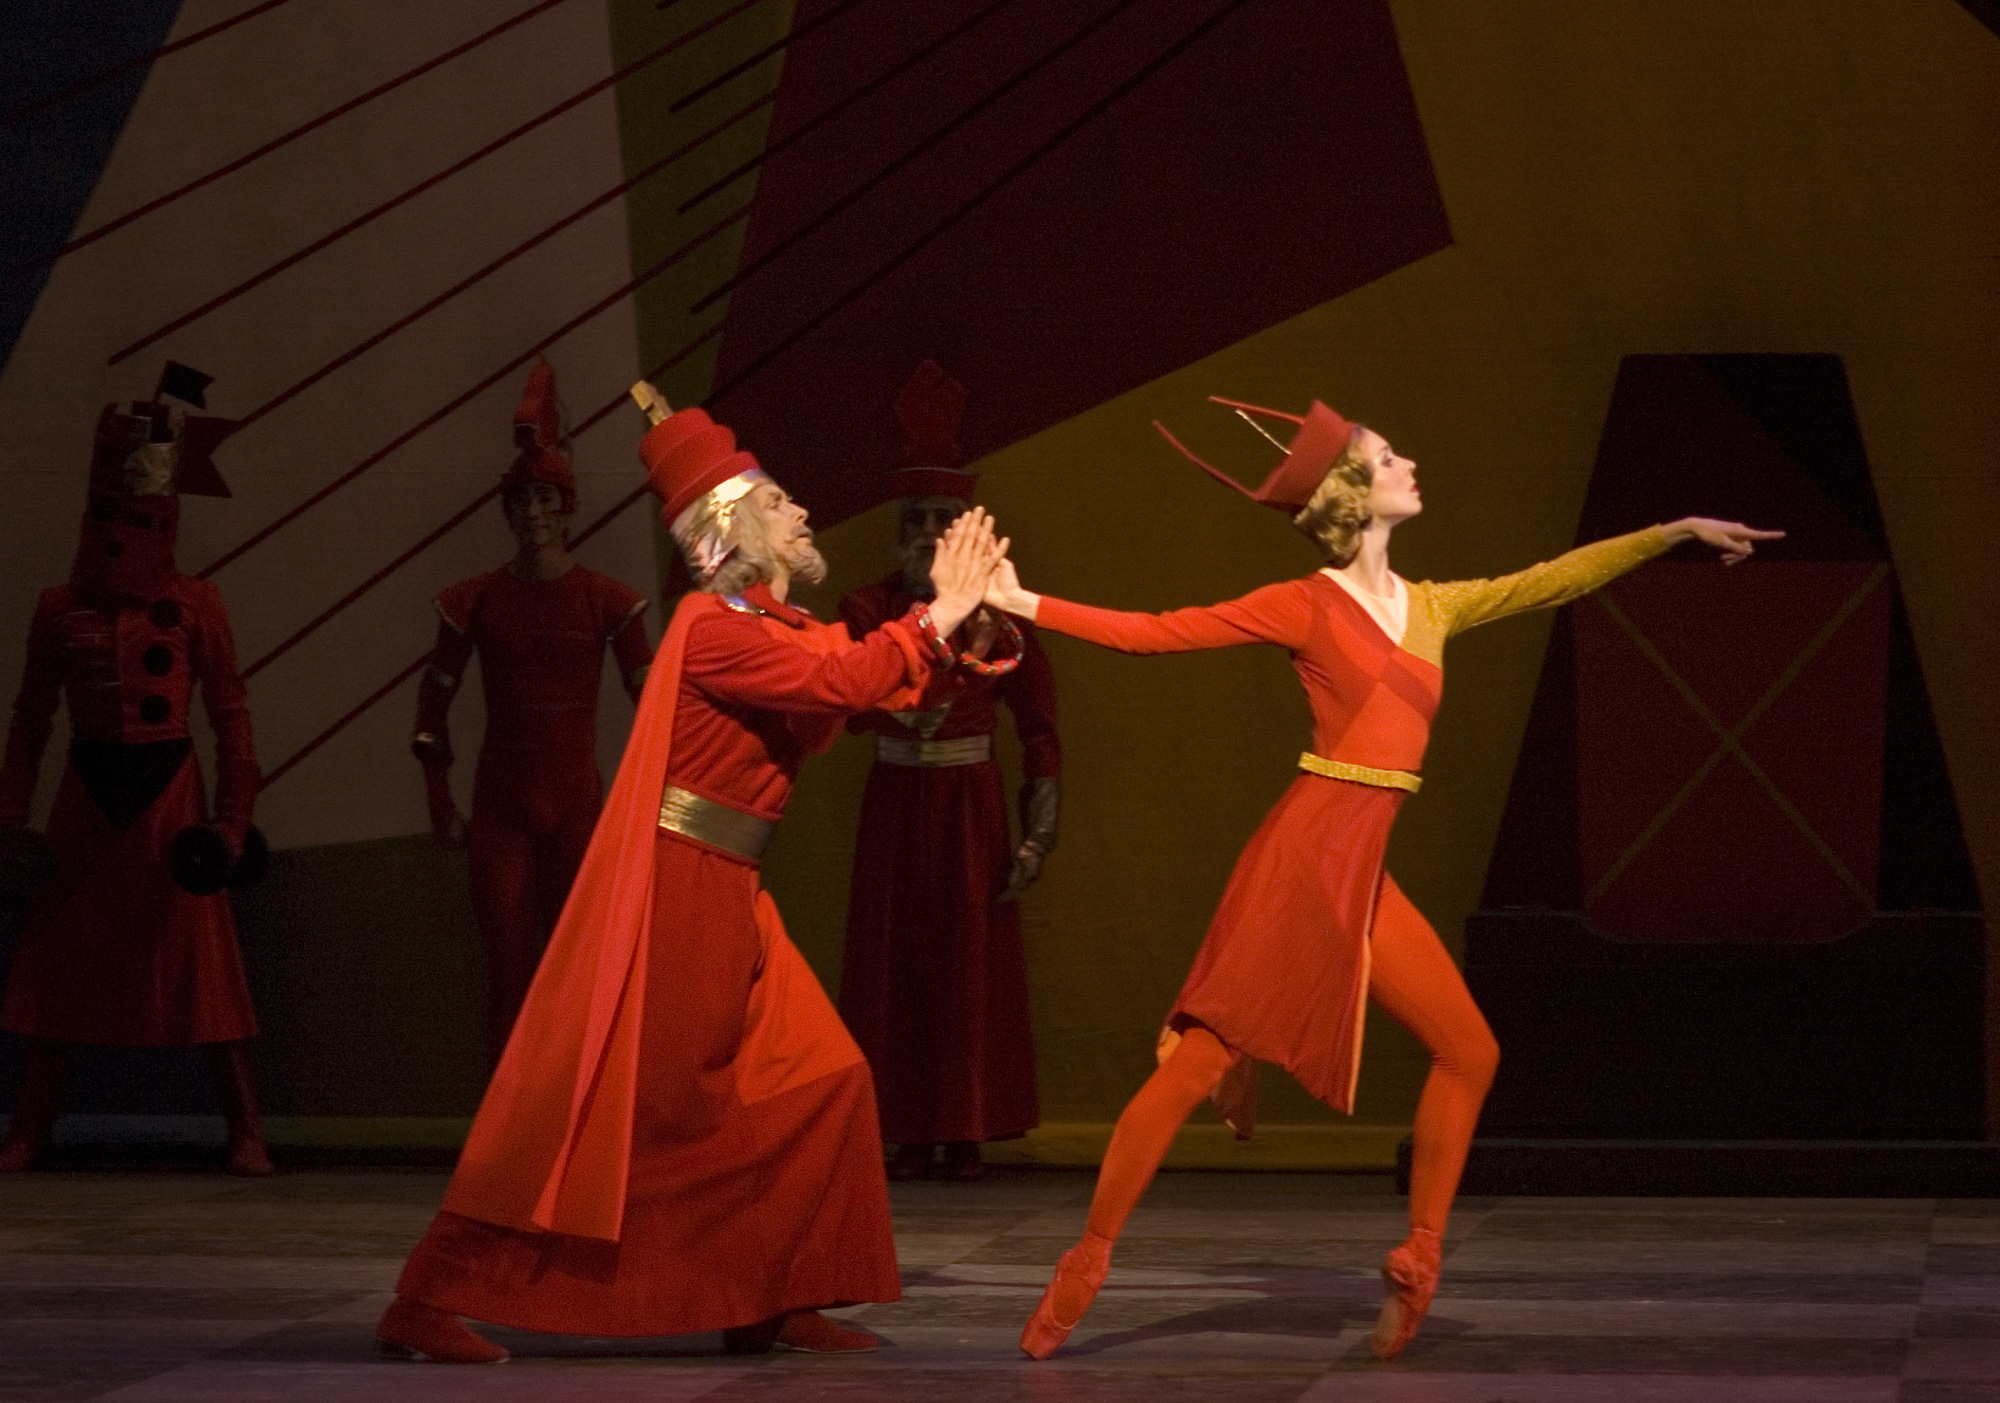 The Sarasota Ballet first staged 